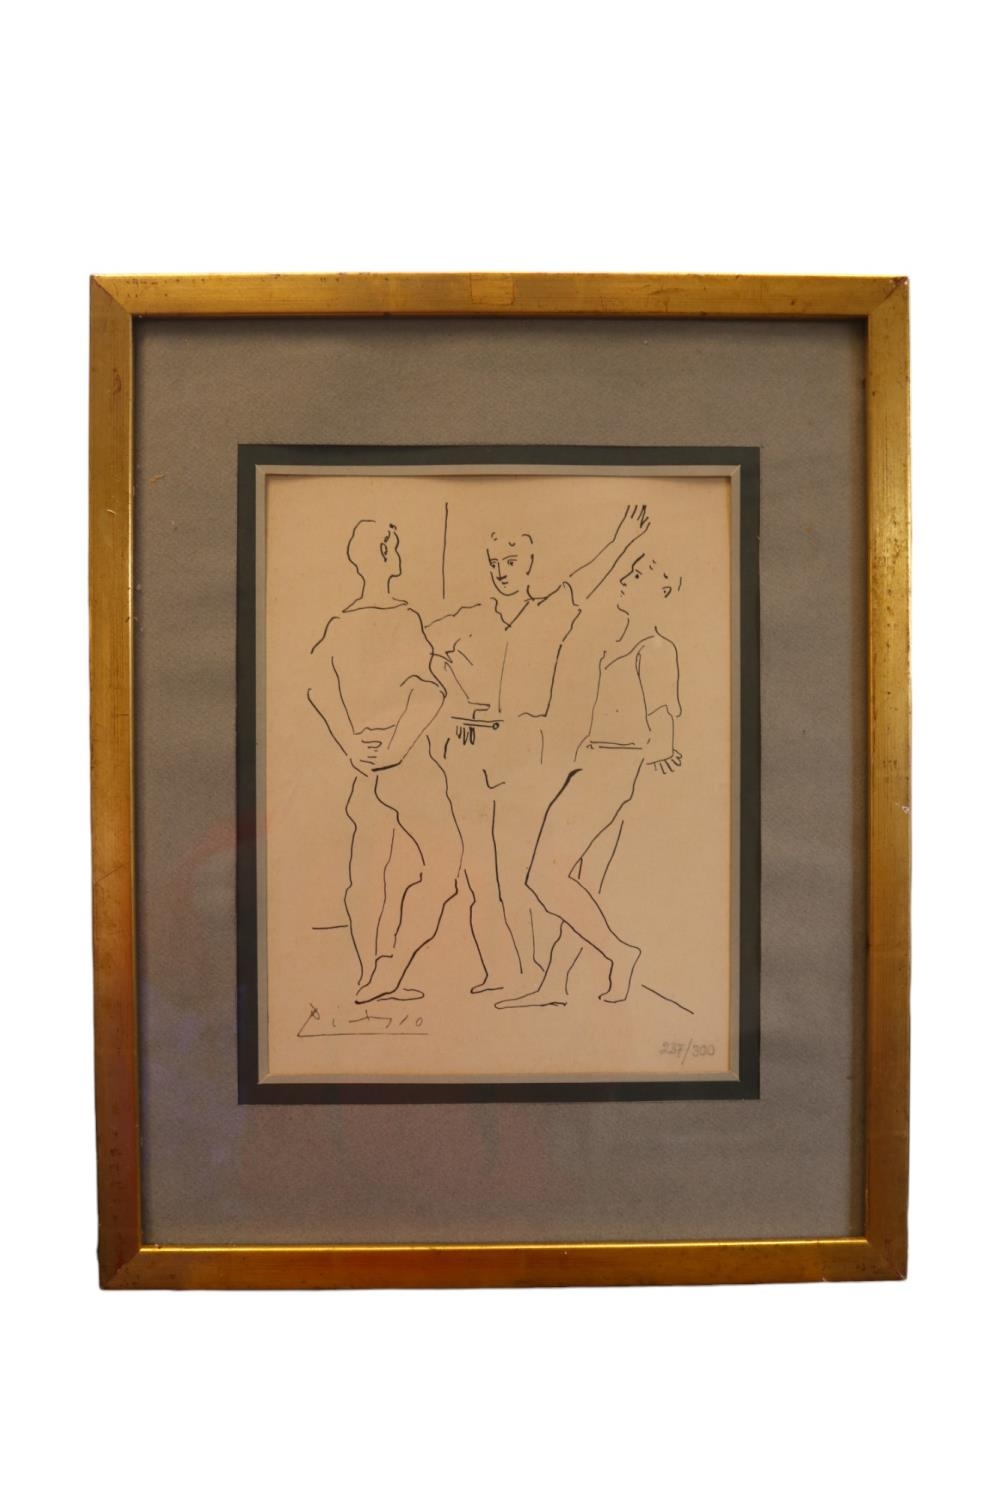 Pablo Picasso (Spanish, 1881-1973). Ltd edition off set lithograph, 237/500 entitled 'The Three